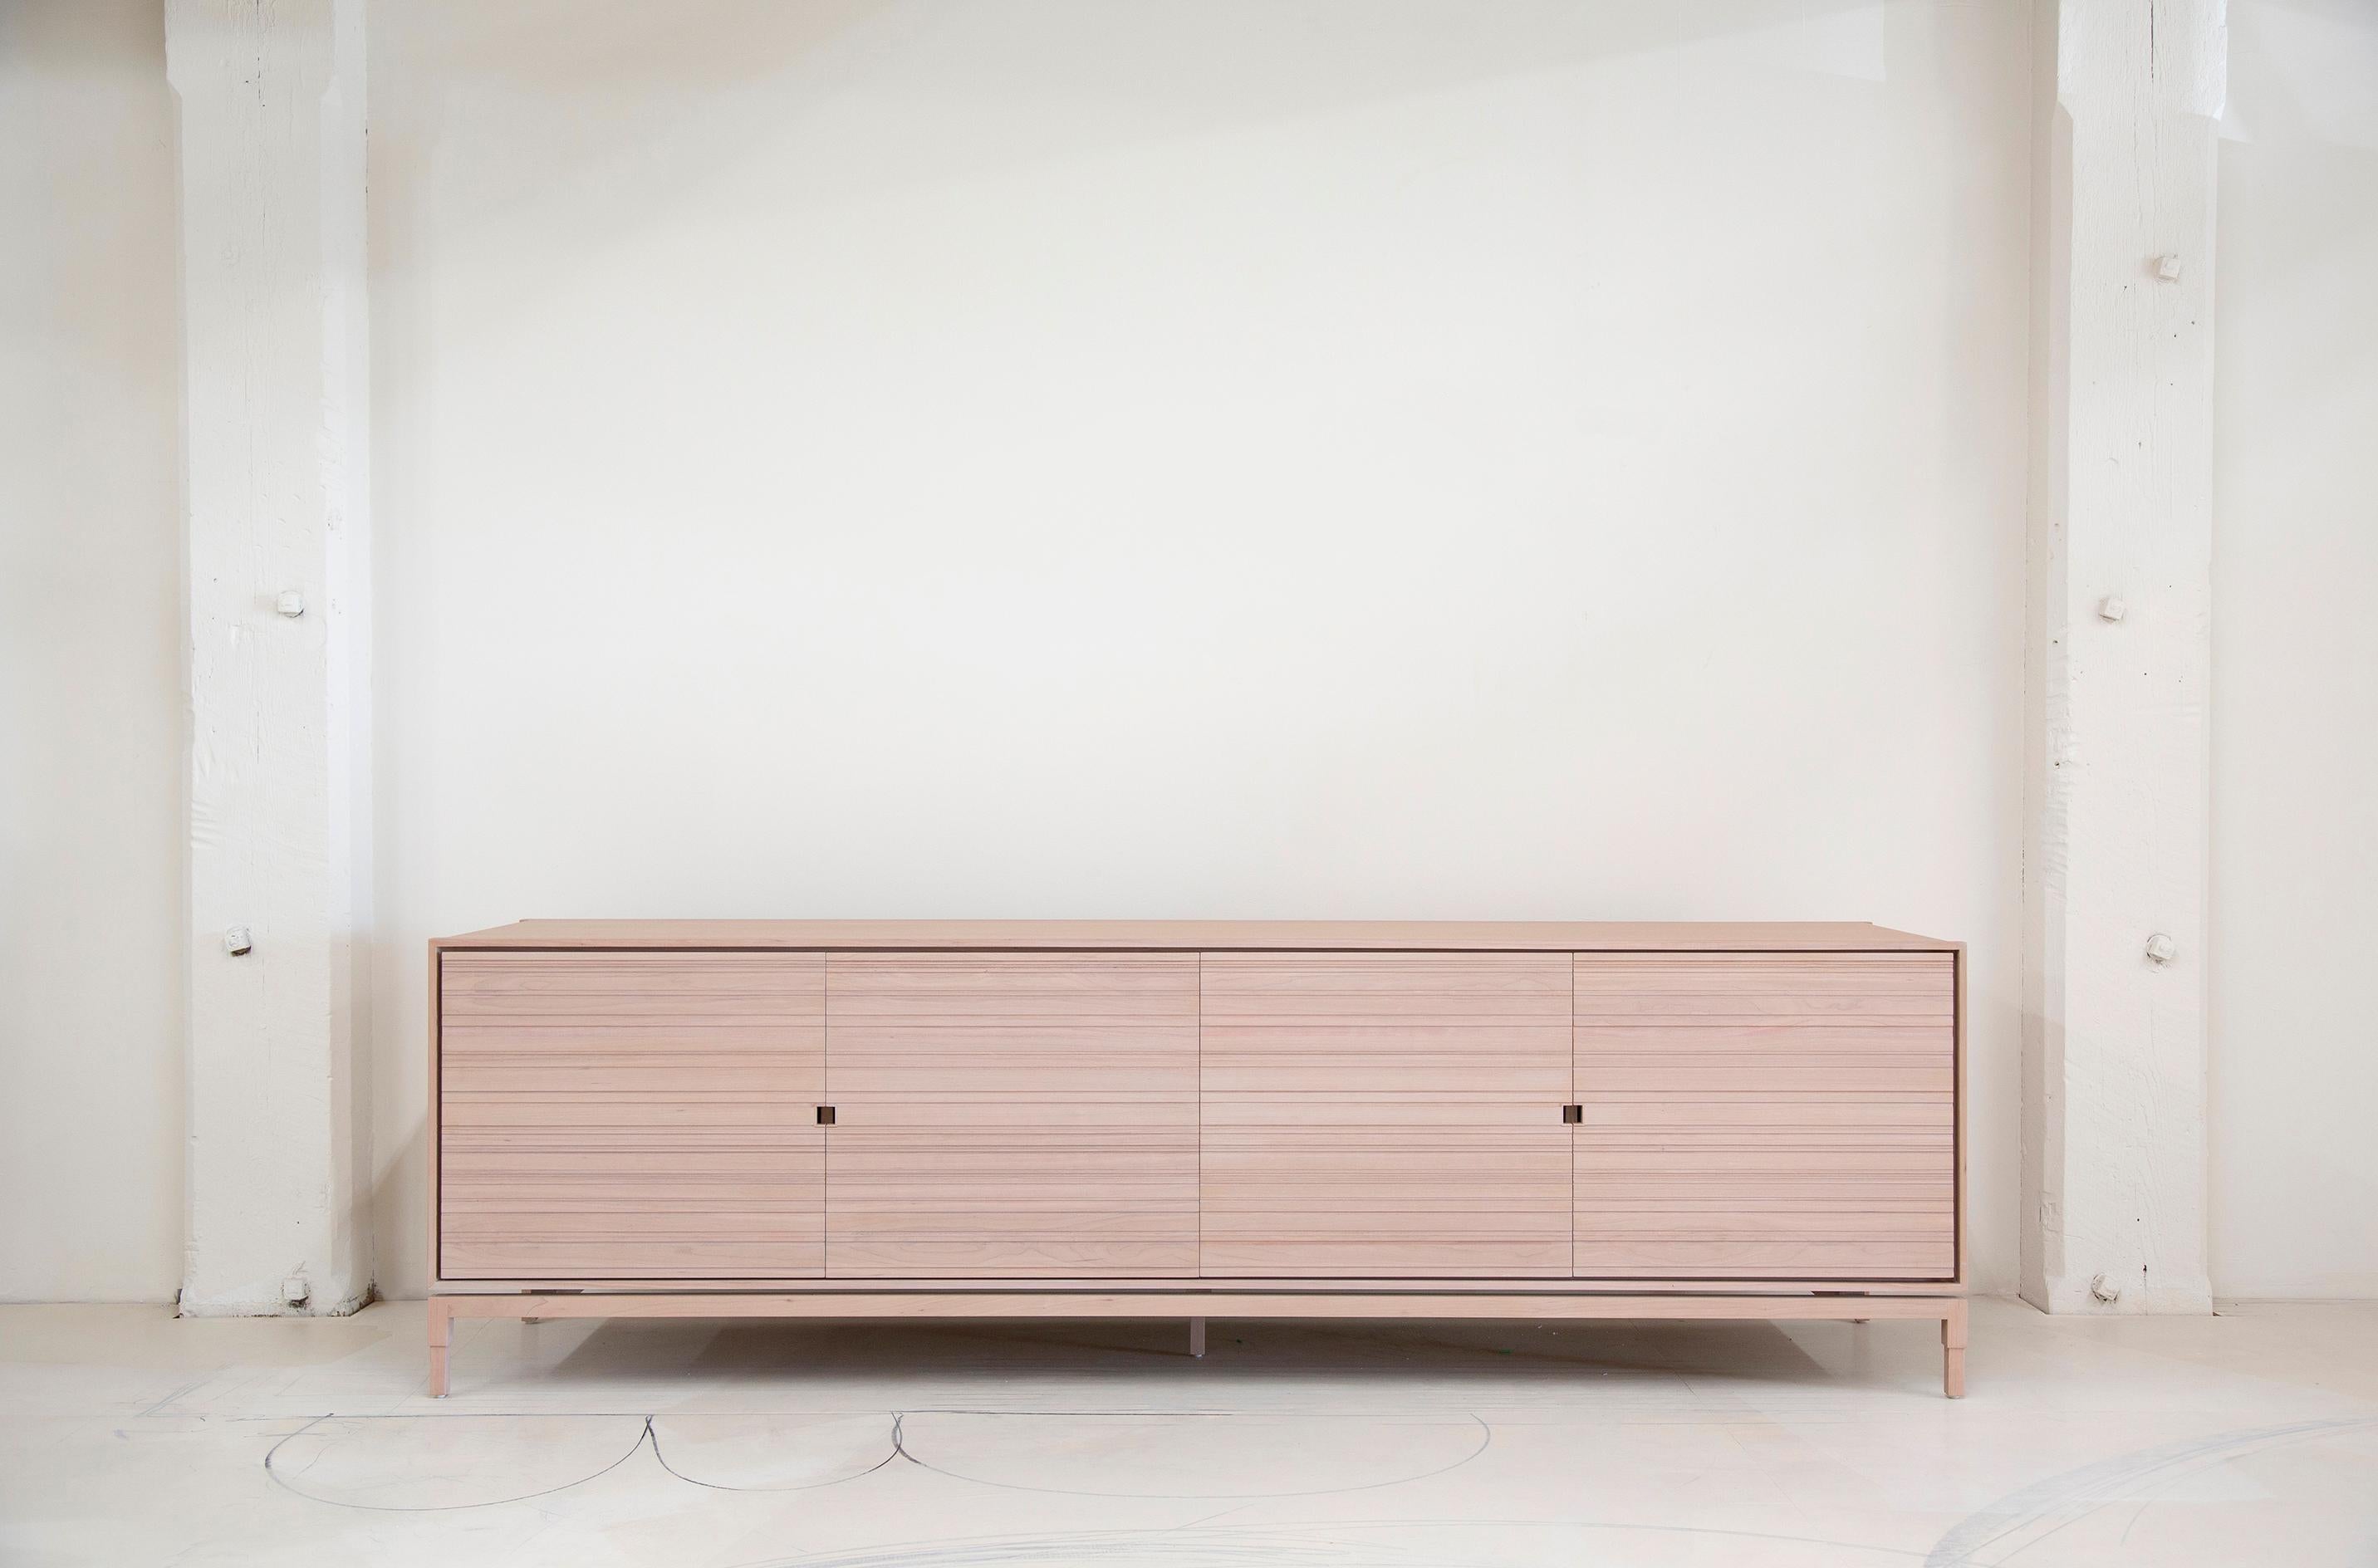 Woodwork In Stock Chicago Credenza in Blush by May Furniture